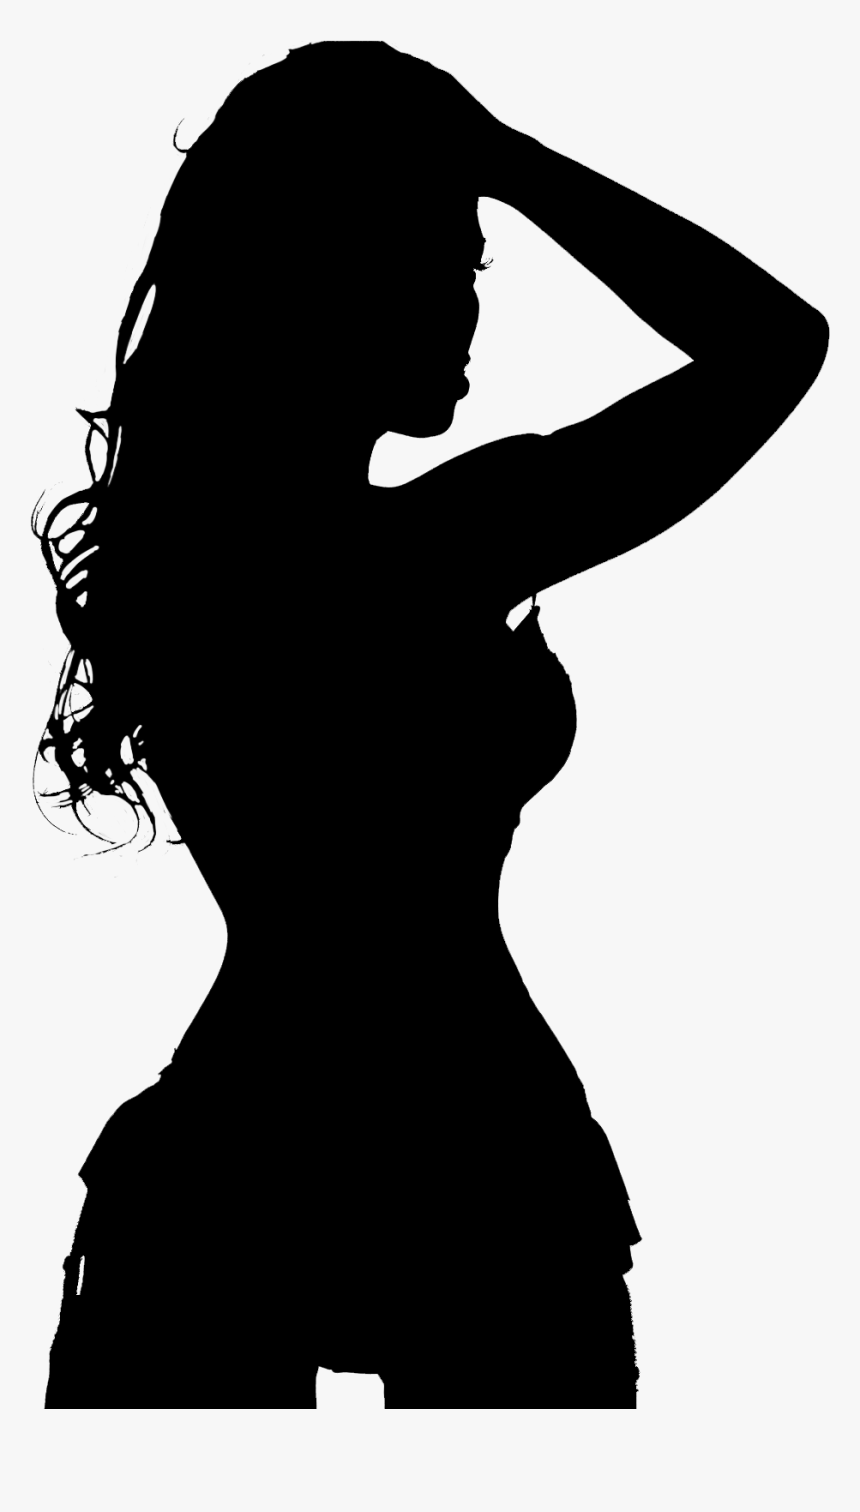 Top Images For Silueta De Mujer On Picsunday - Silueta Negra De Mujer Sexy, HD Png Download, Free Download